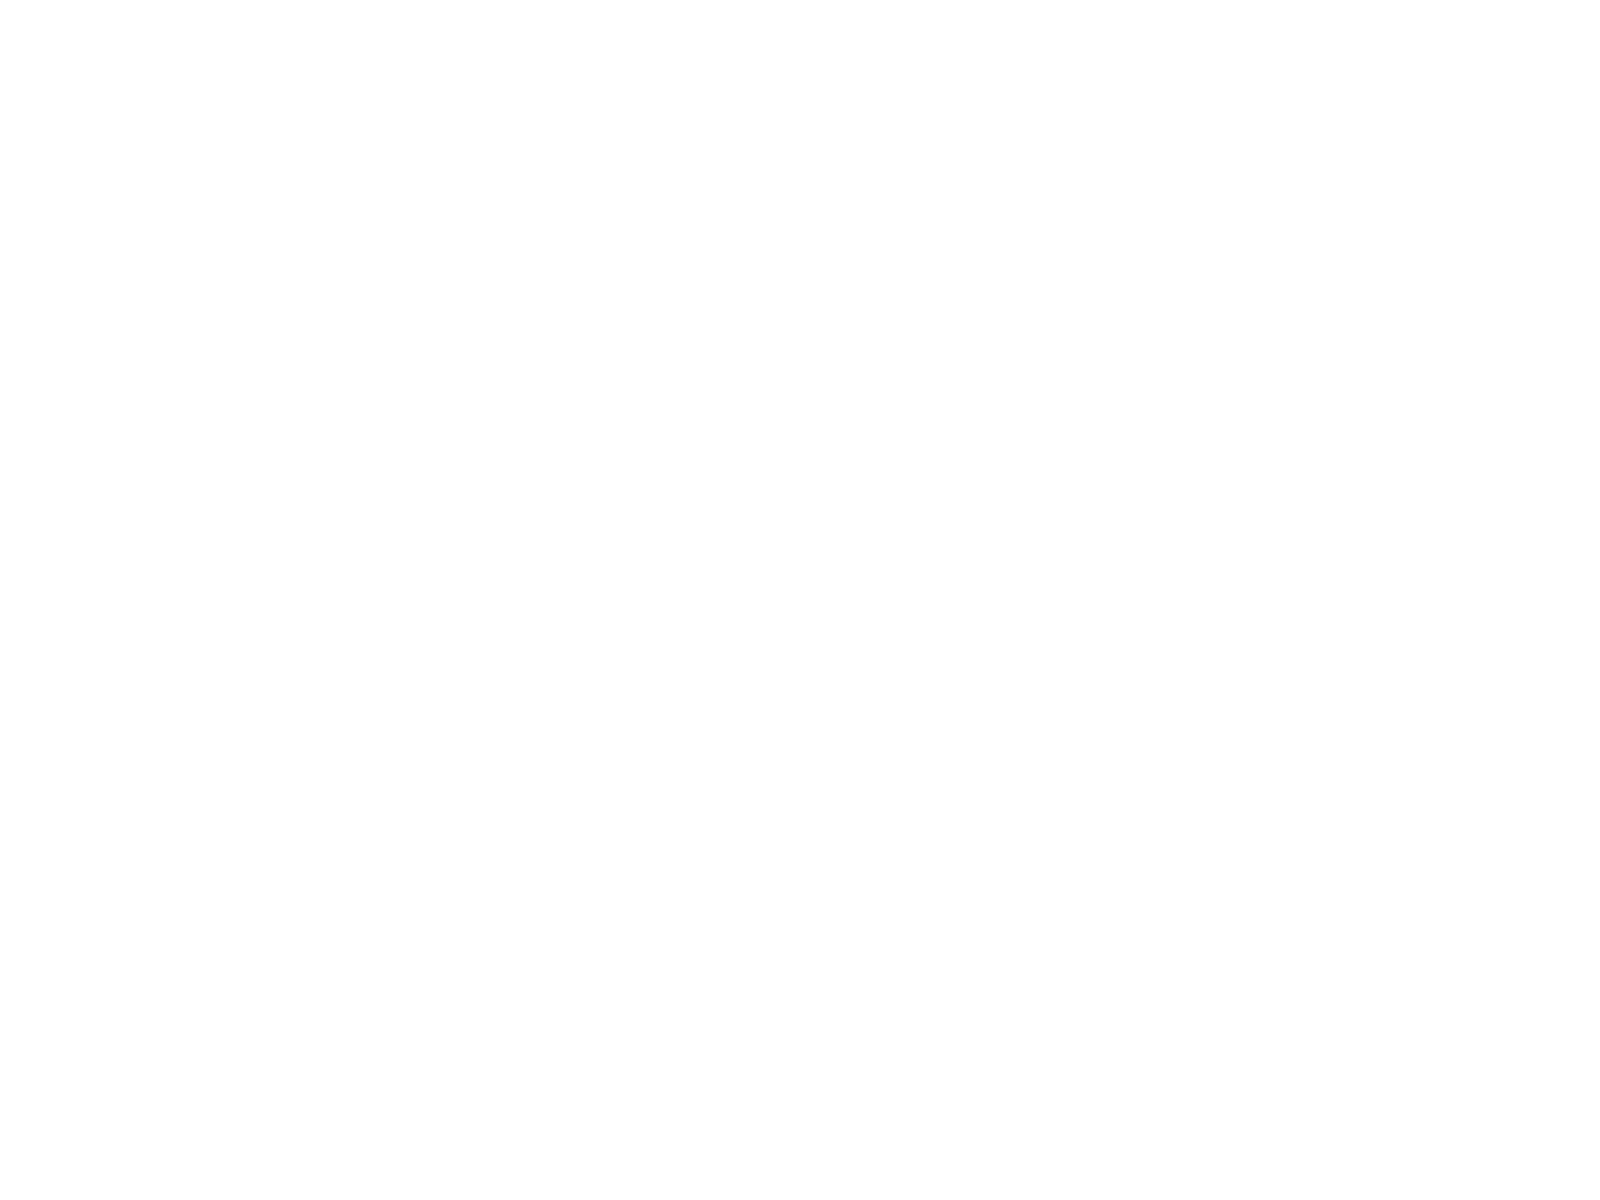 The Hunted Crows